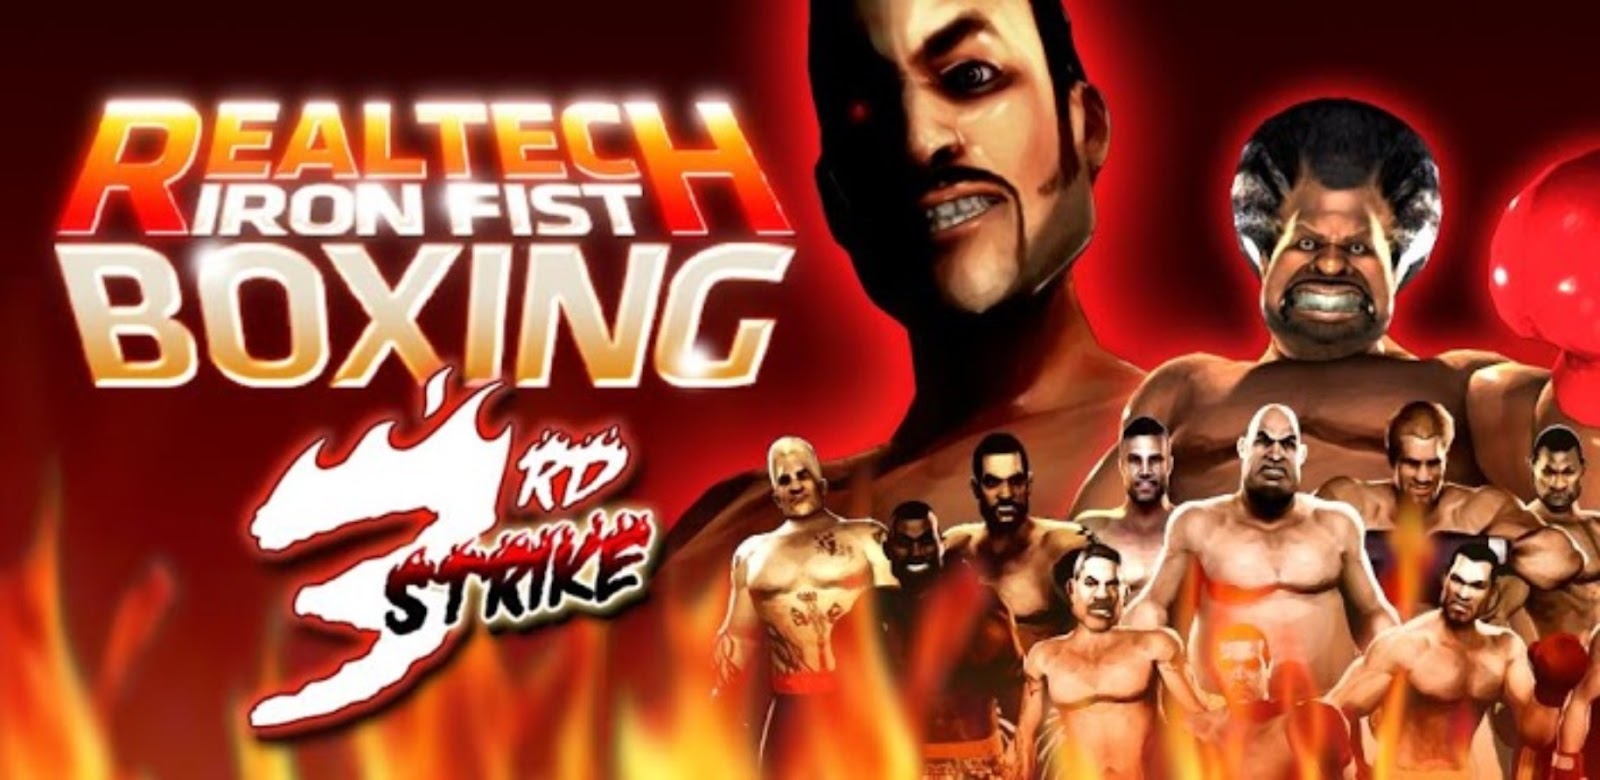 Iron Fist Boxing v4.2.2 APK + SD DATA | Android Games Download